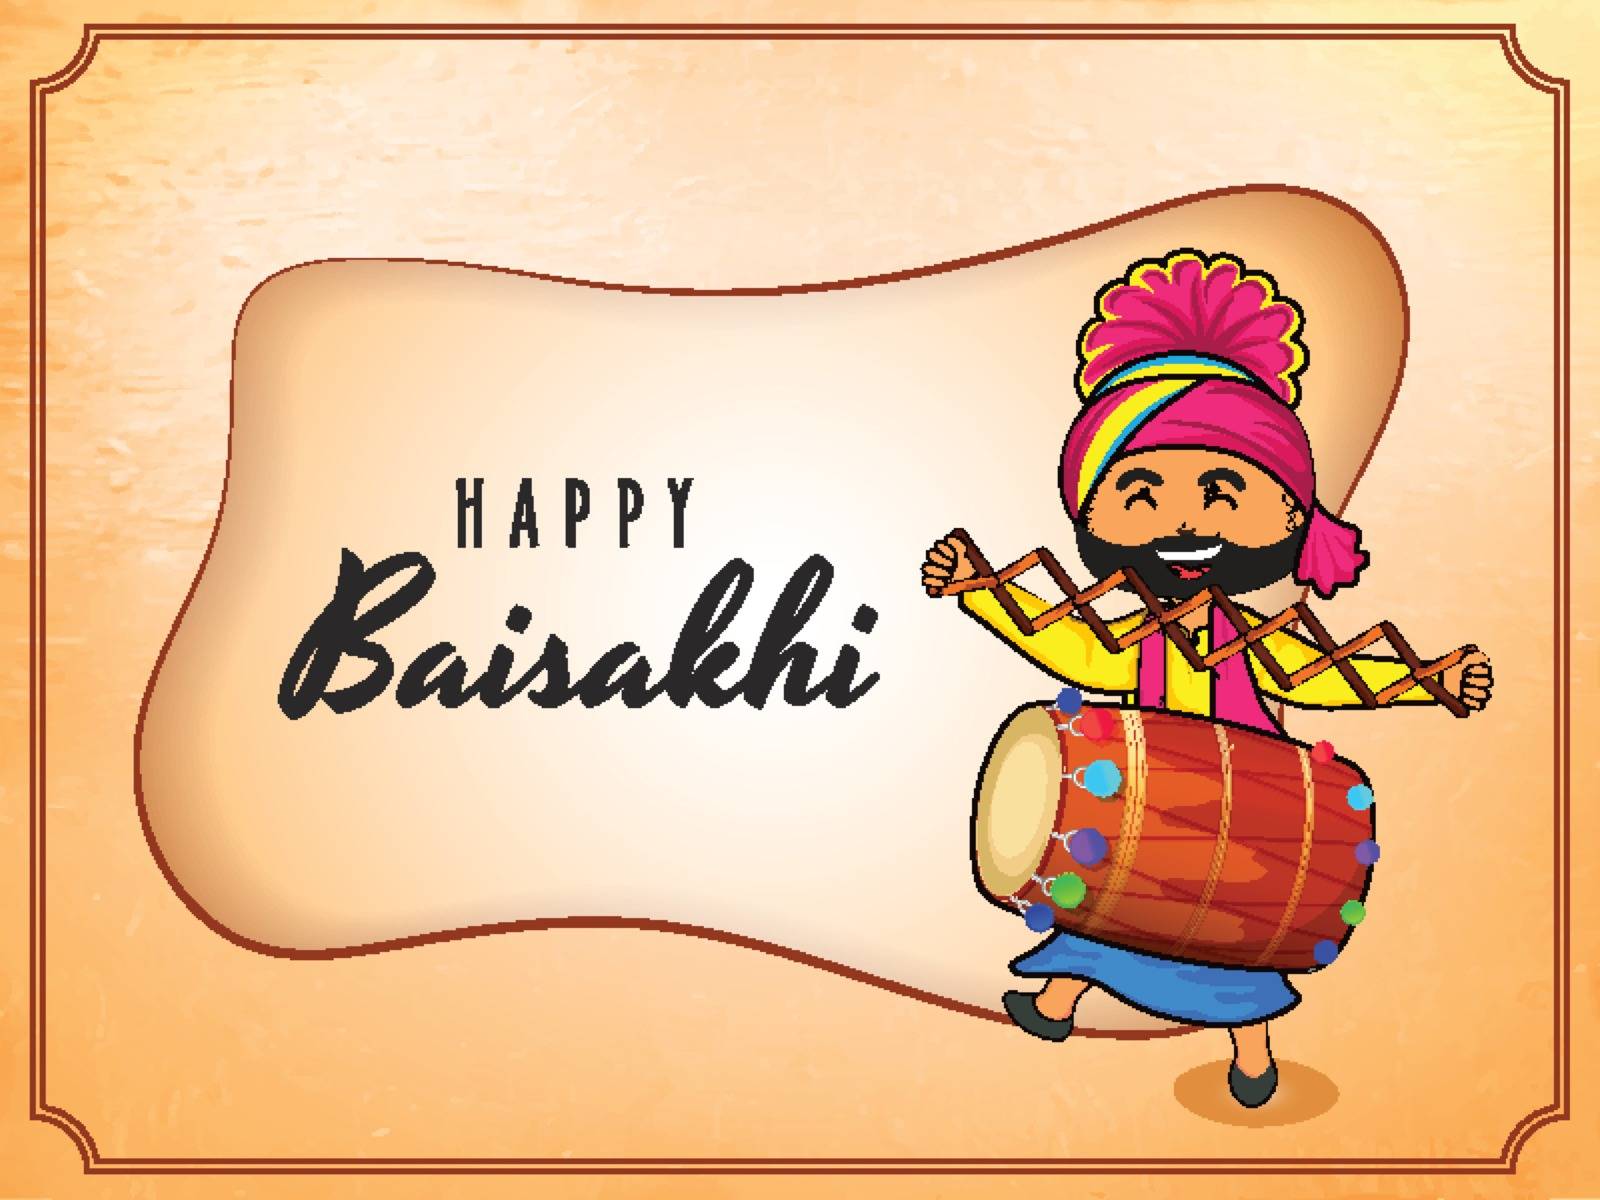 Cute punjabi man dancing while playing drum, Baisakhi celebrati Stock Image  | VectorGrove - Royalty Free Vector Images with commercial license